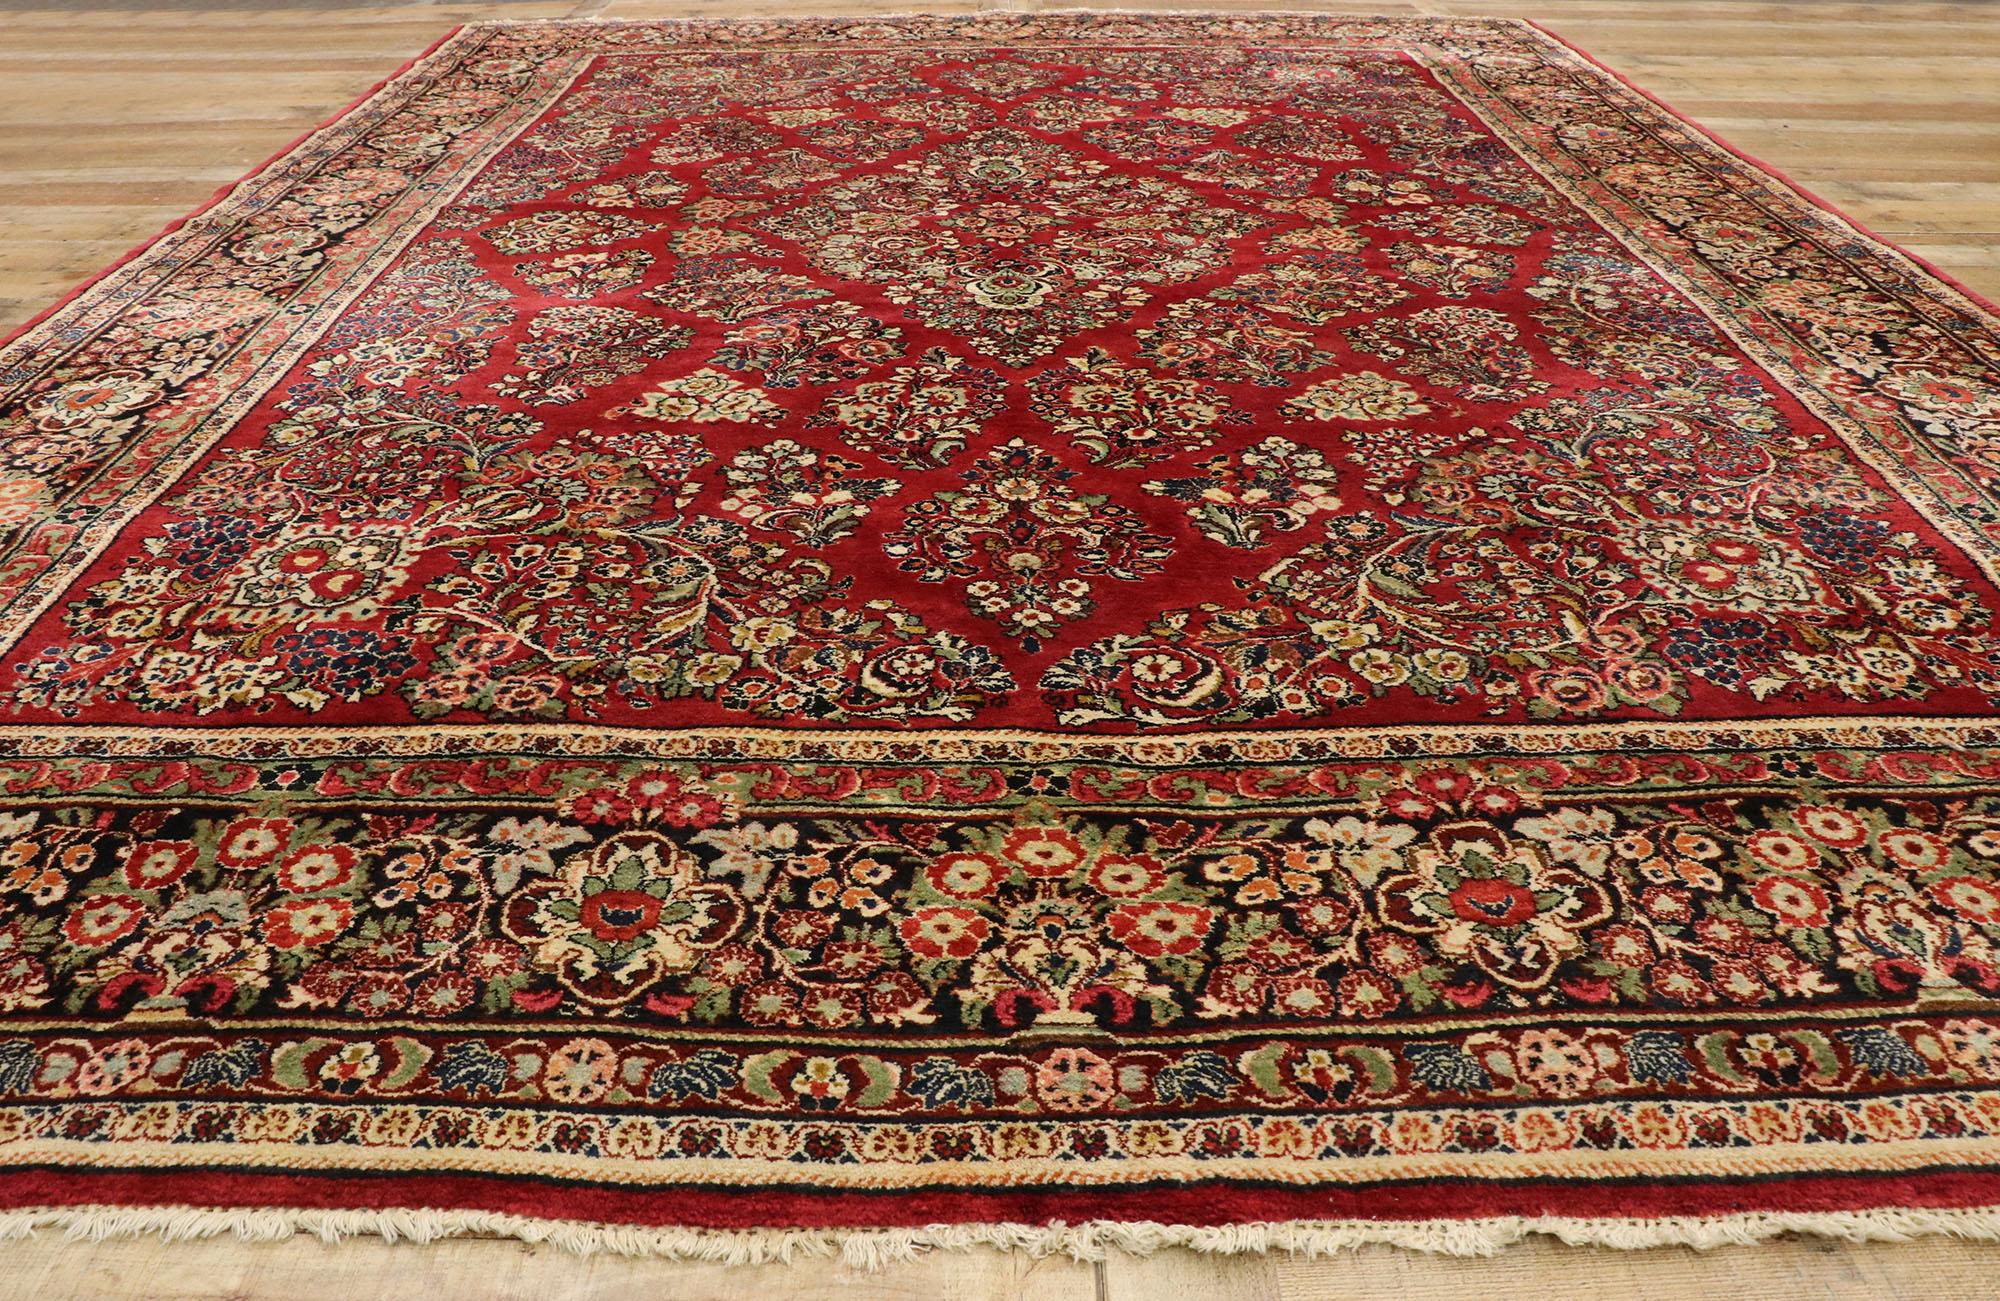 Wool Vintage Persian Sarouk Rug with Traditional English Tudor Manor Style For Sale